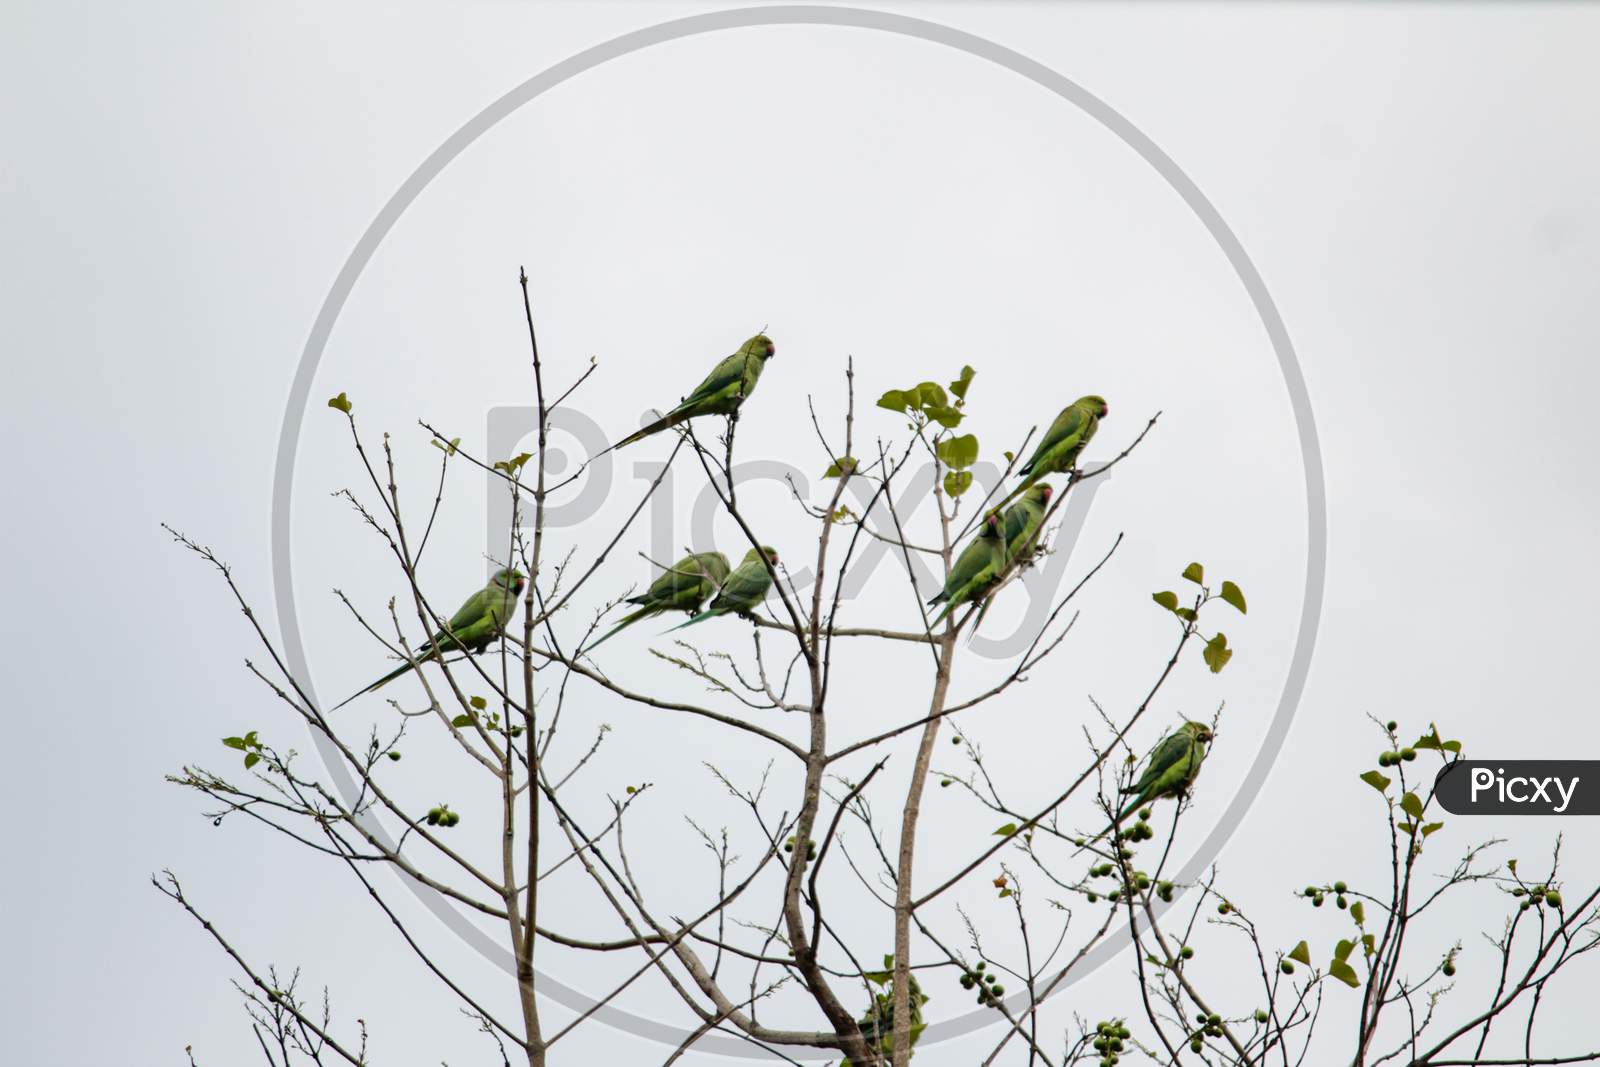 Group Of Parrot On A Tree